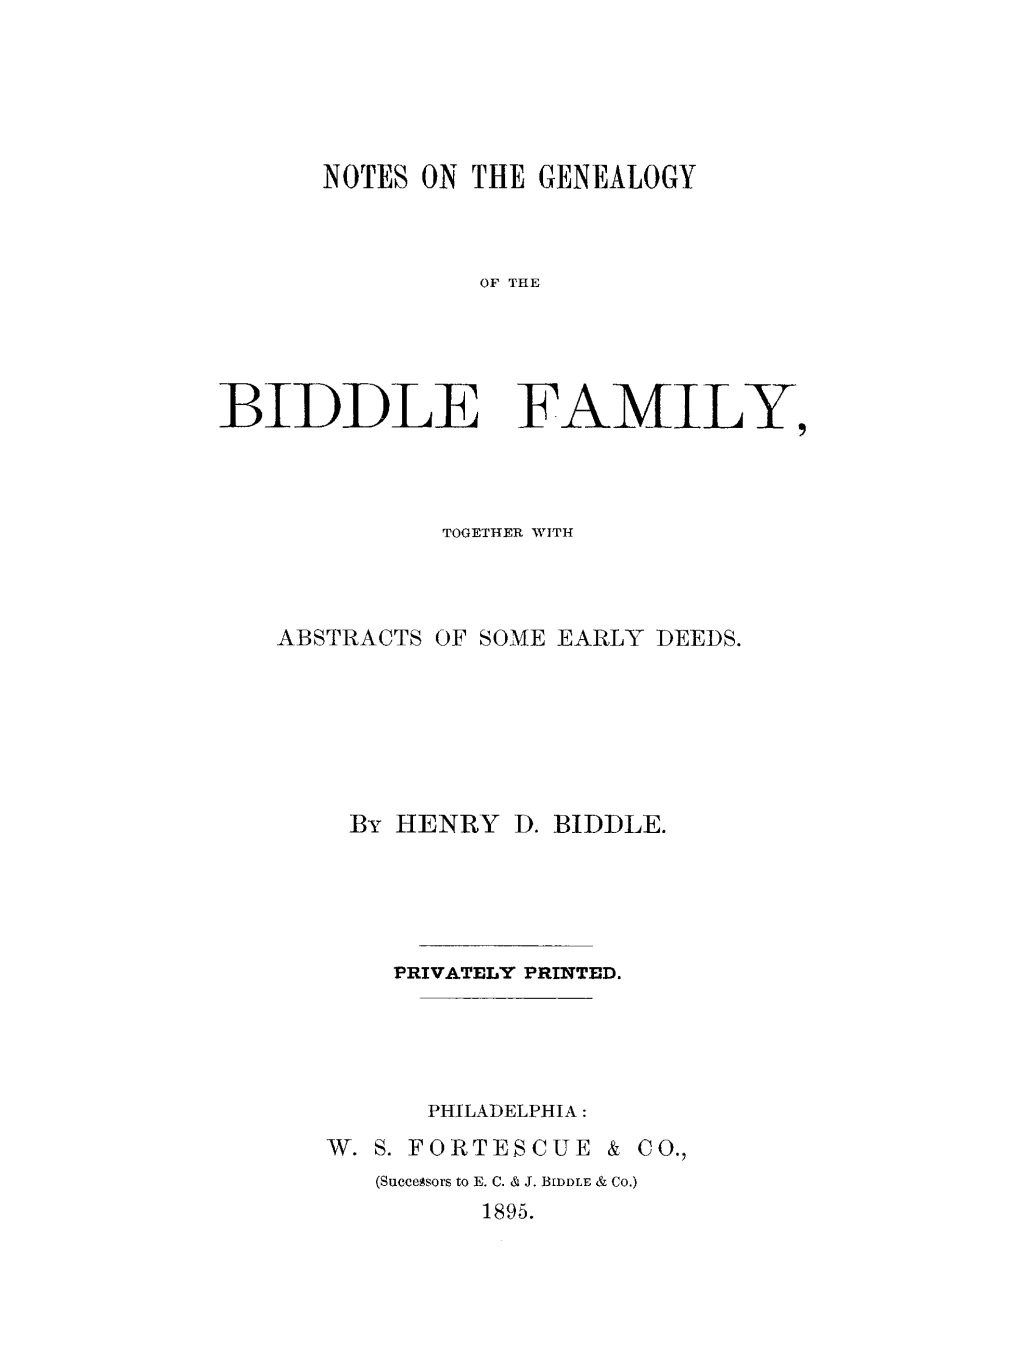 Biddle Family